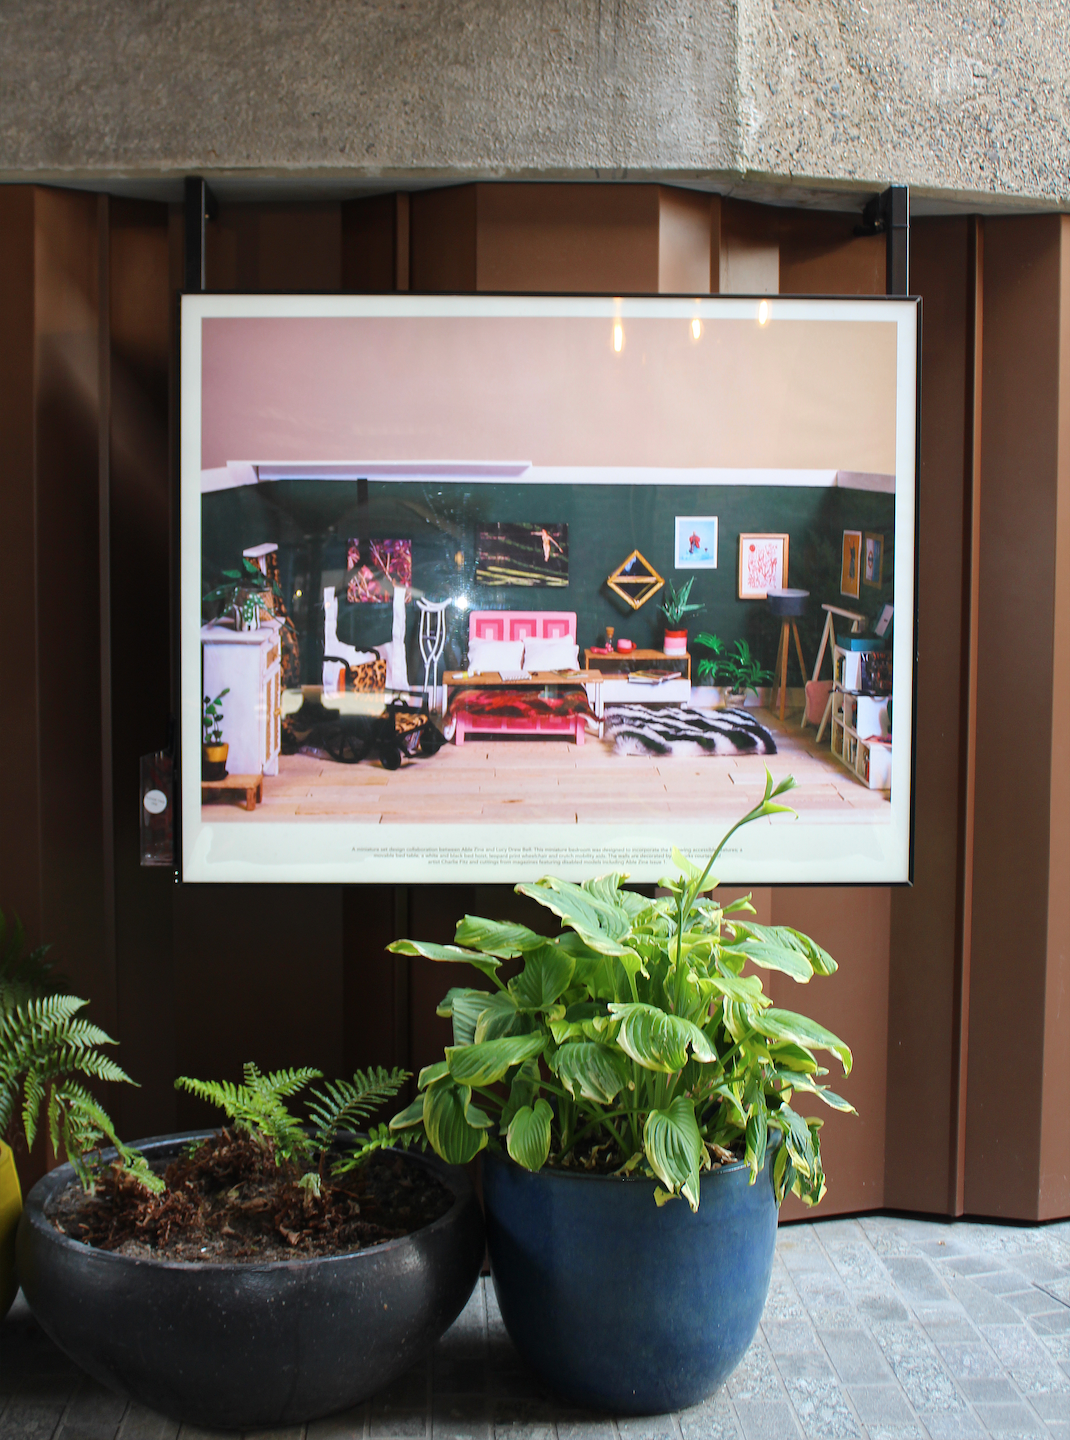 A photograph of a lightbox that shows a miniature model set of a bedroom. The bedroom is covered in unique decorations. It has a bed in the middle with a movable bed desk above, covered in art materials. There is also a leopard print wheelchair, crutches and a bed hoist in the room. On the floor is a fluffy zebra print rug. Outside of the lightbox theres a concrete wall and three trees/plants sat infront of the lightbox.